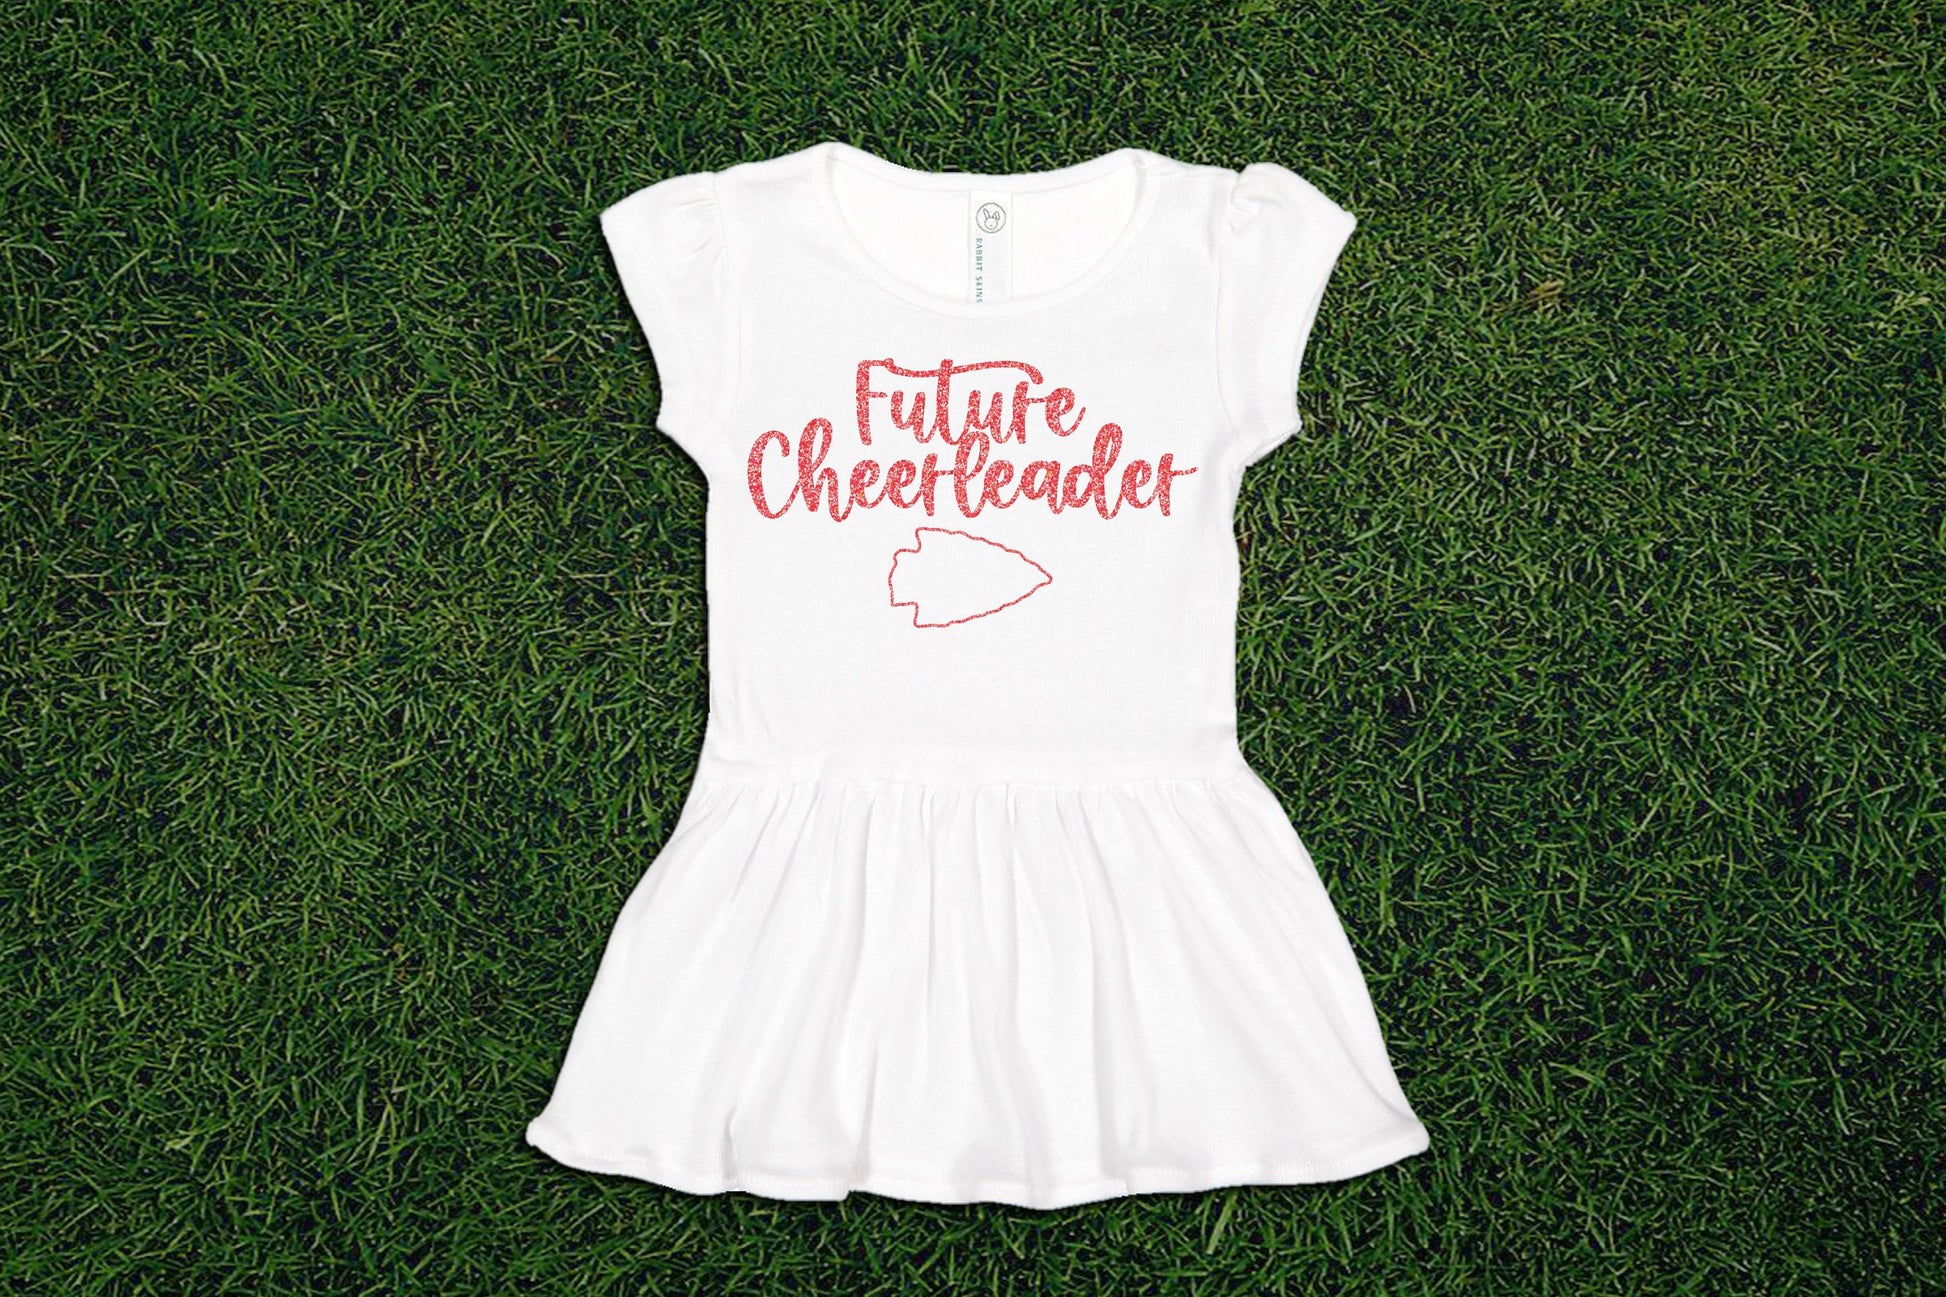 a white dress that says future cheerleader and an arrowhead on it